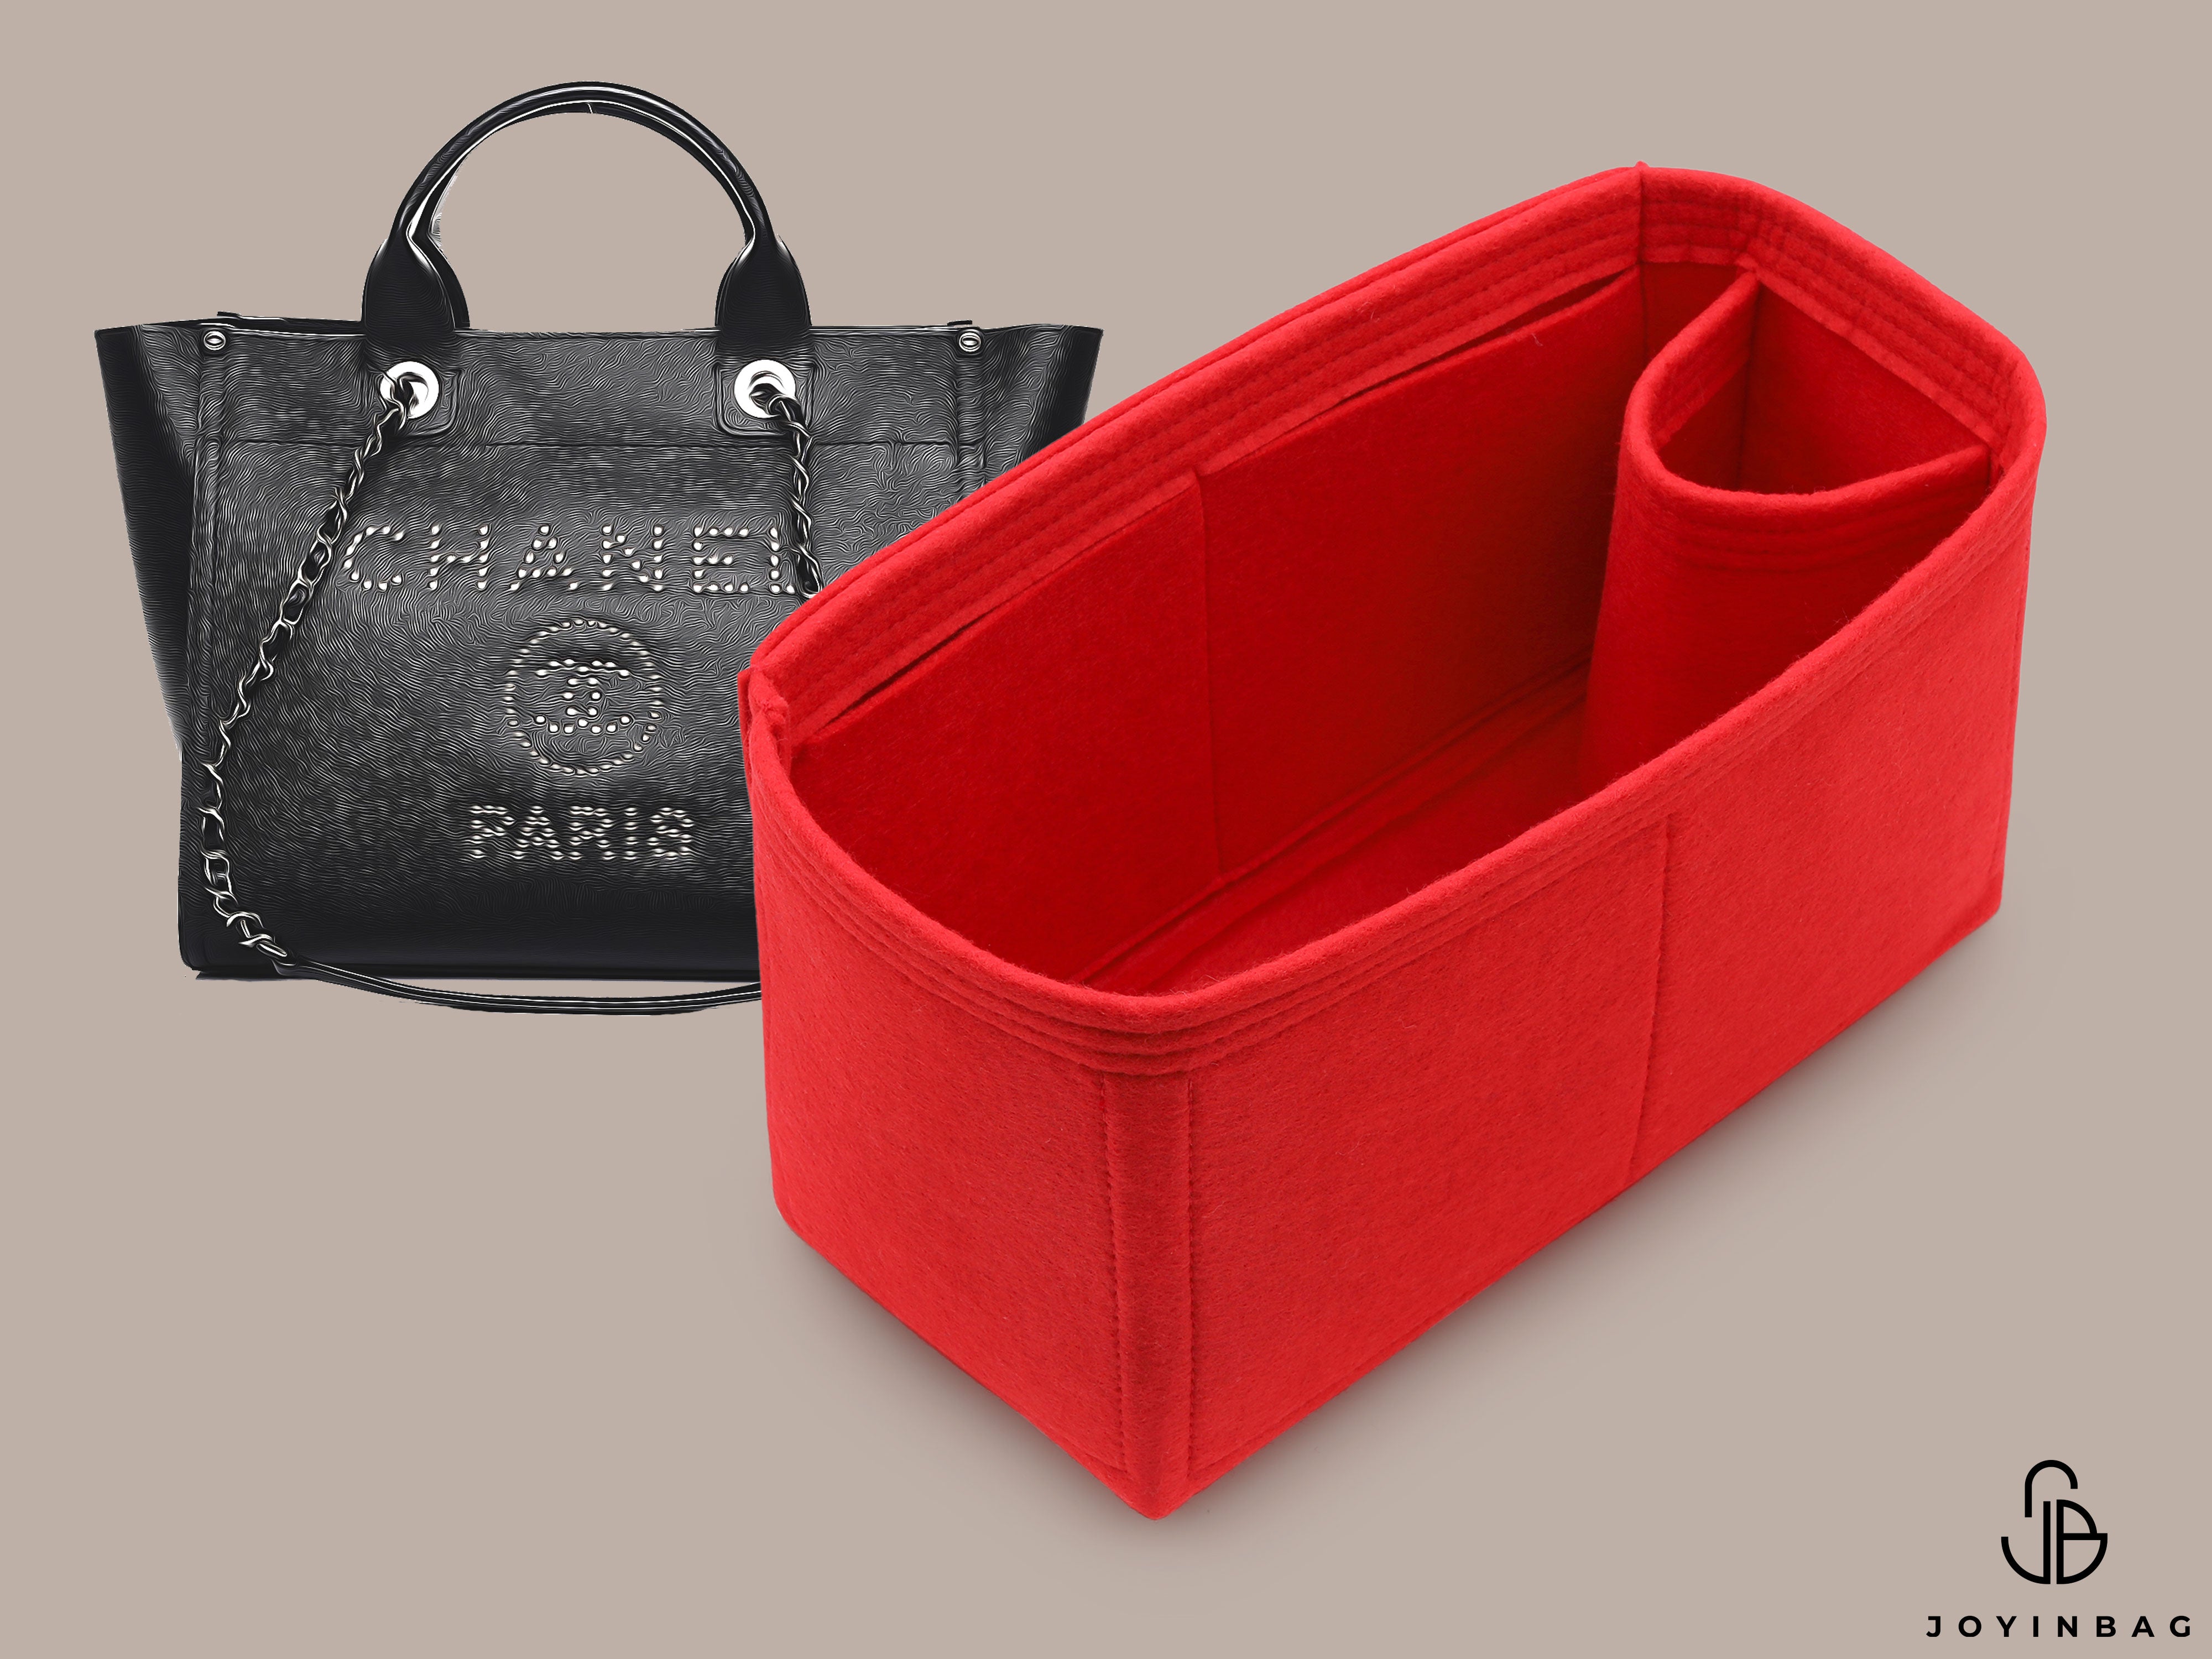 Tote Bag Organizer for Chanel Deauville Leather Small Bag with Single Bottle Holder